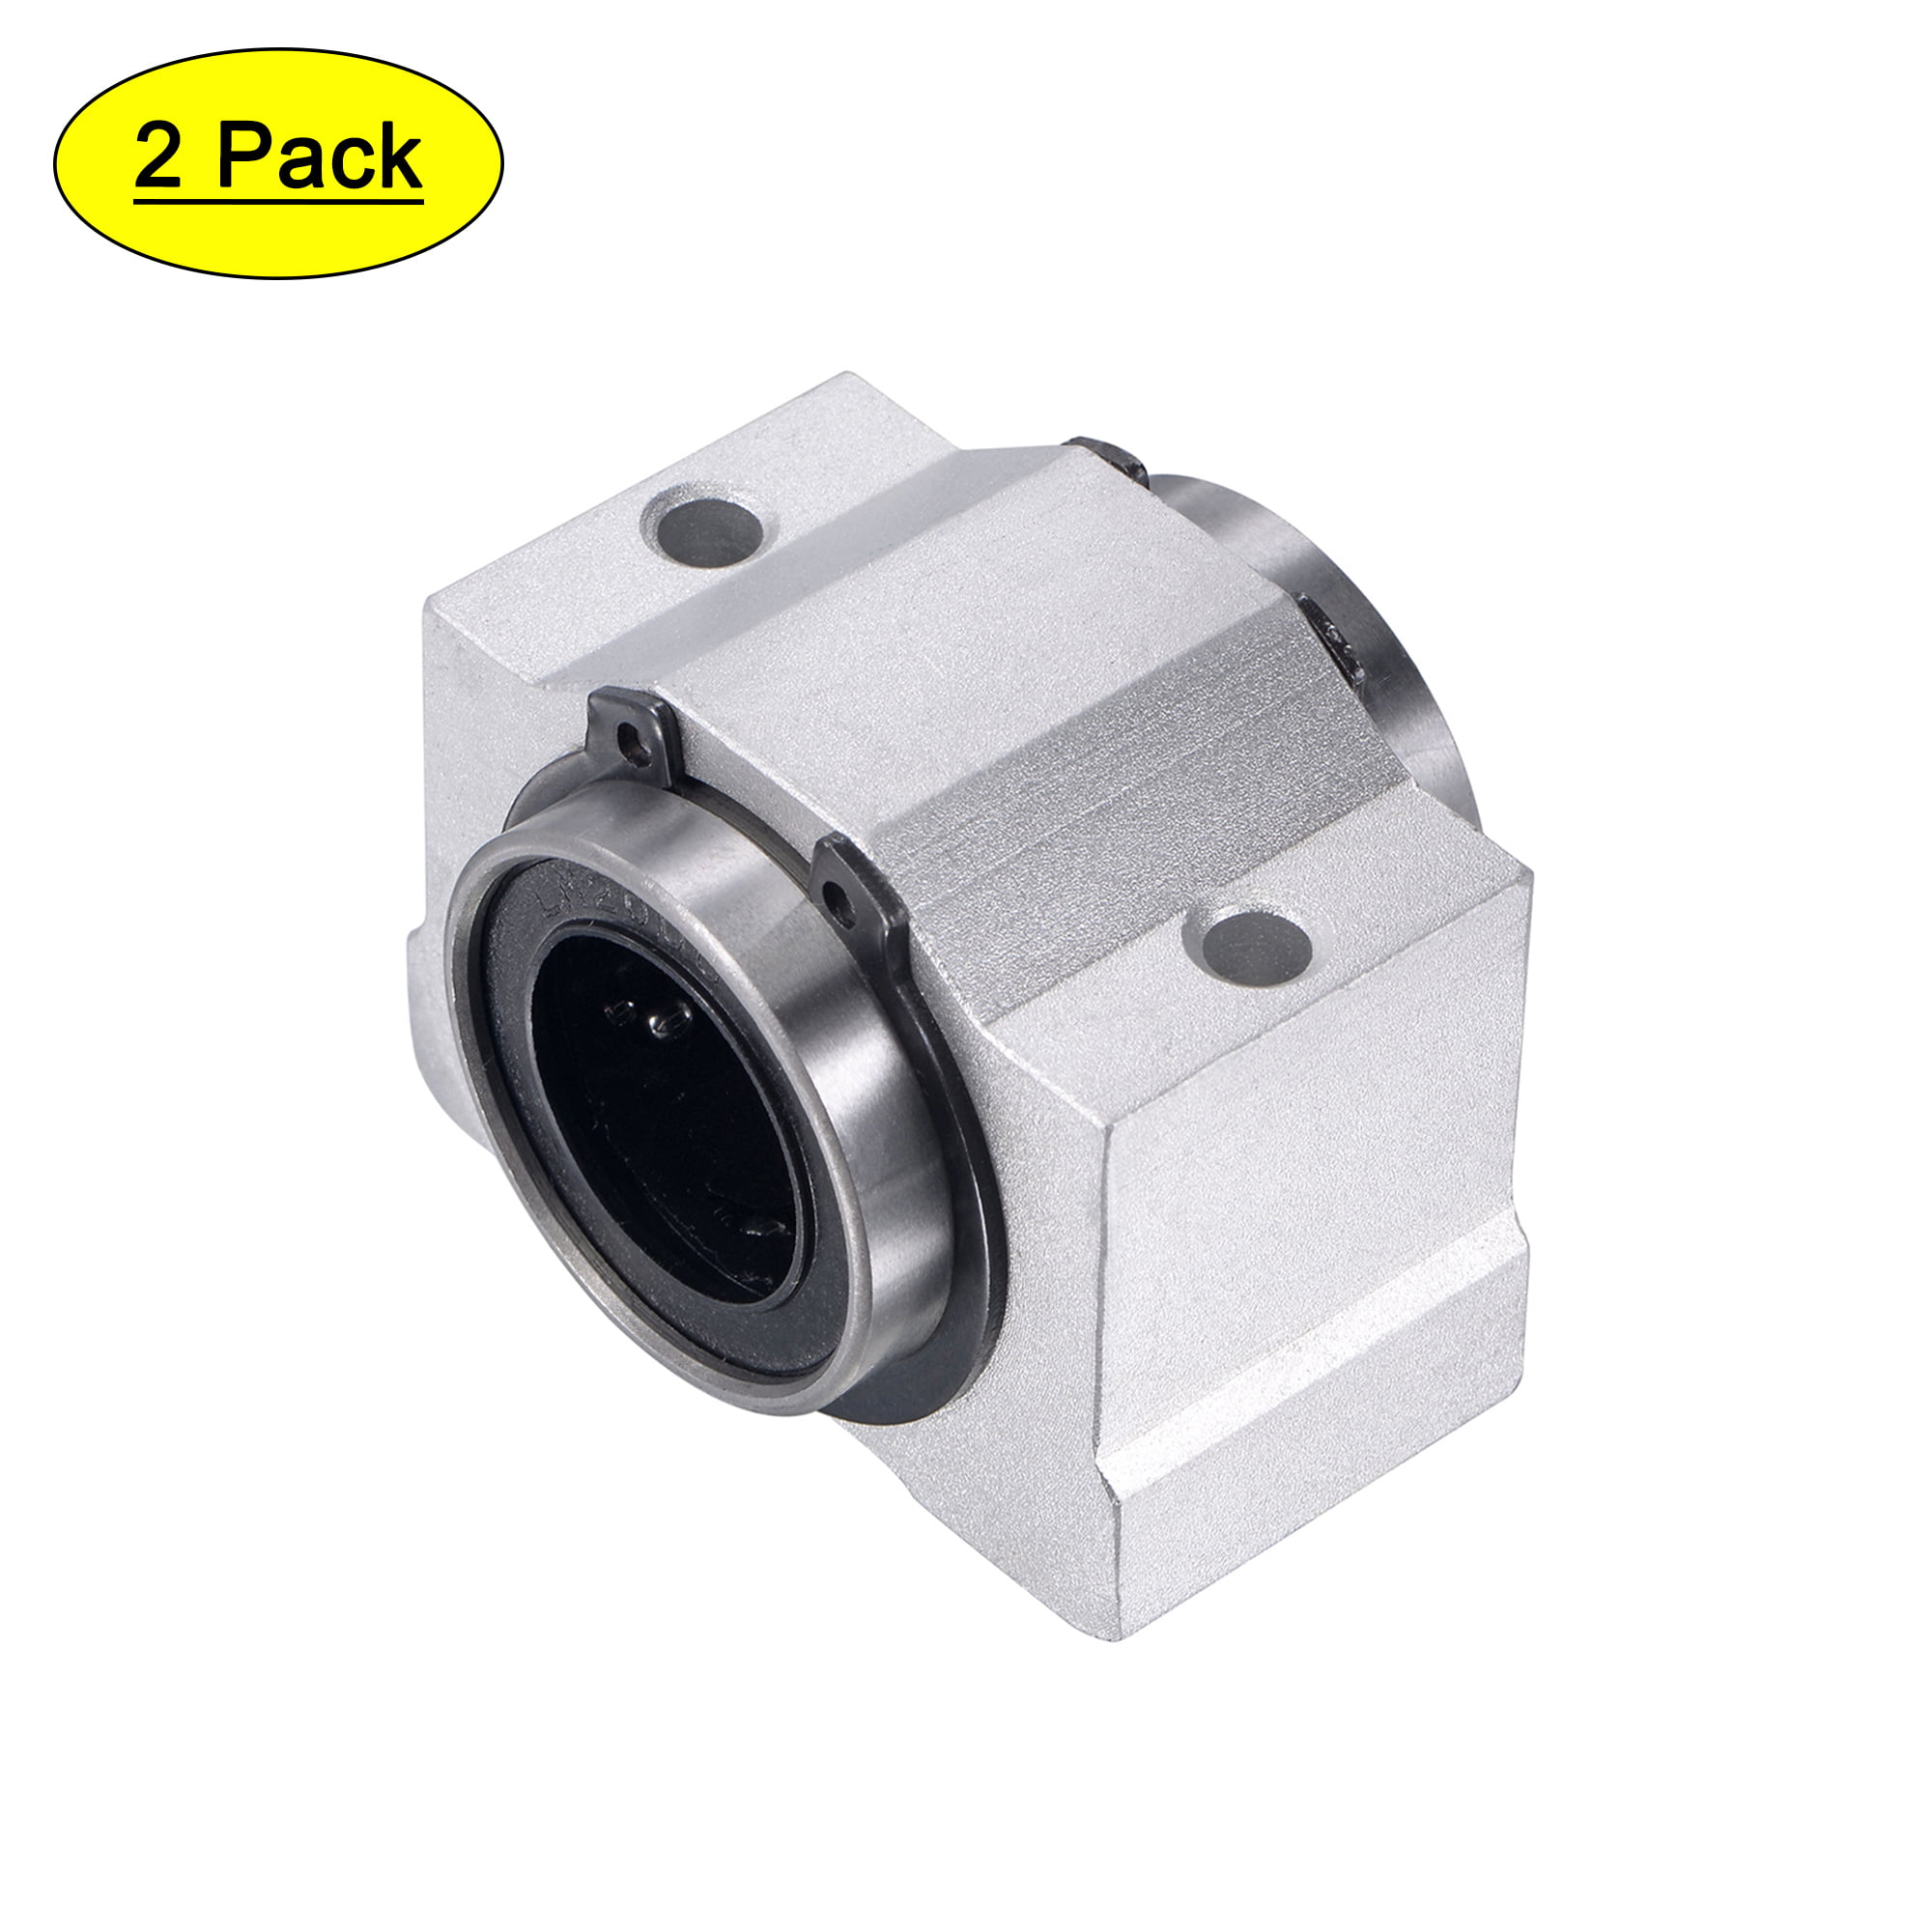 Pack of 2 uxcell TBR20UU Linear Ball Bearing Slide Block Units 20mm Bore Dia 